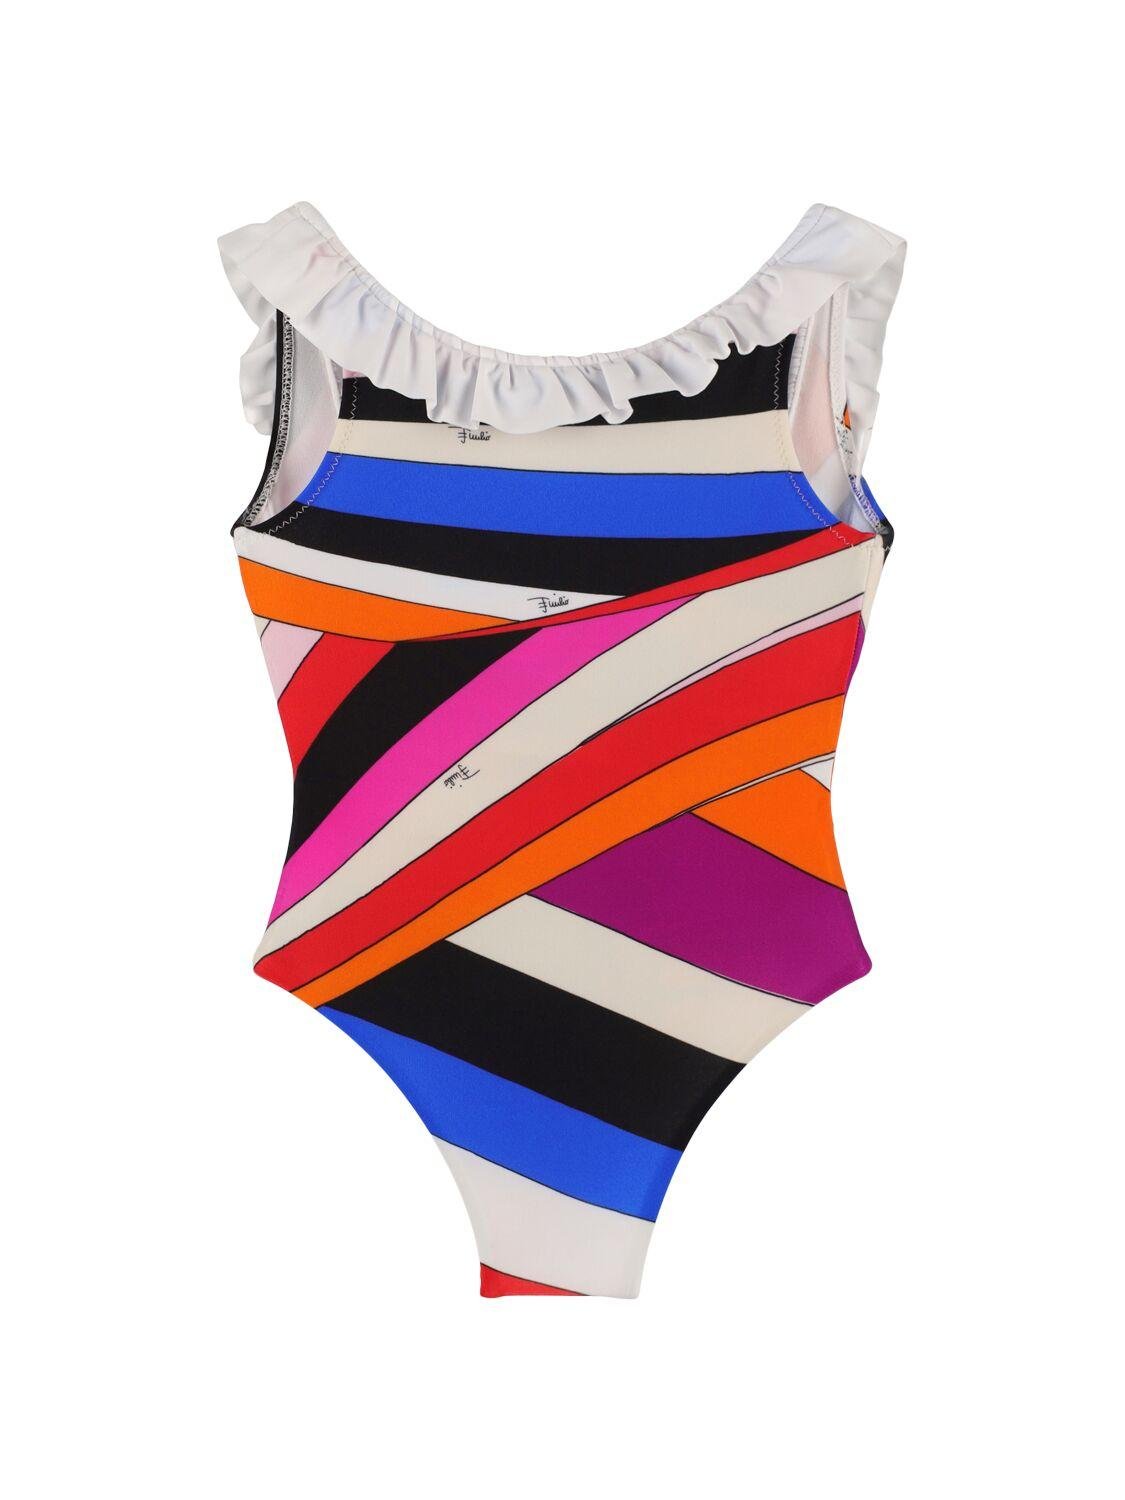 Printed Ruffled One Piece Lycra Swimsuit by PUCCI